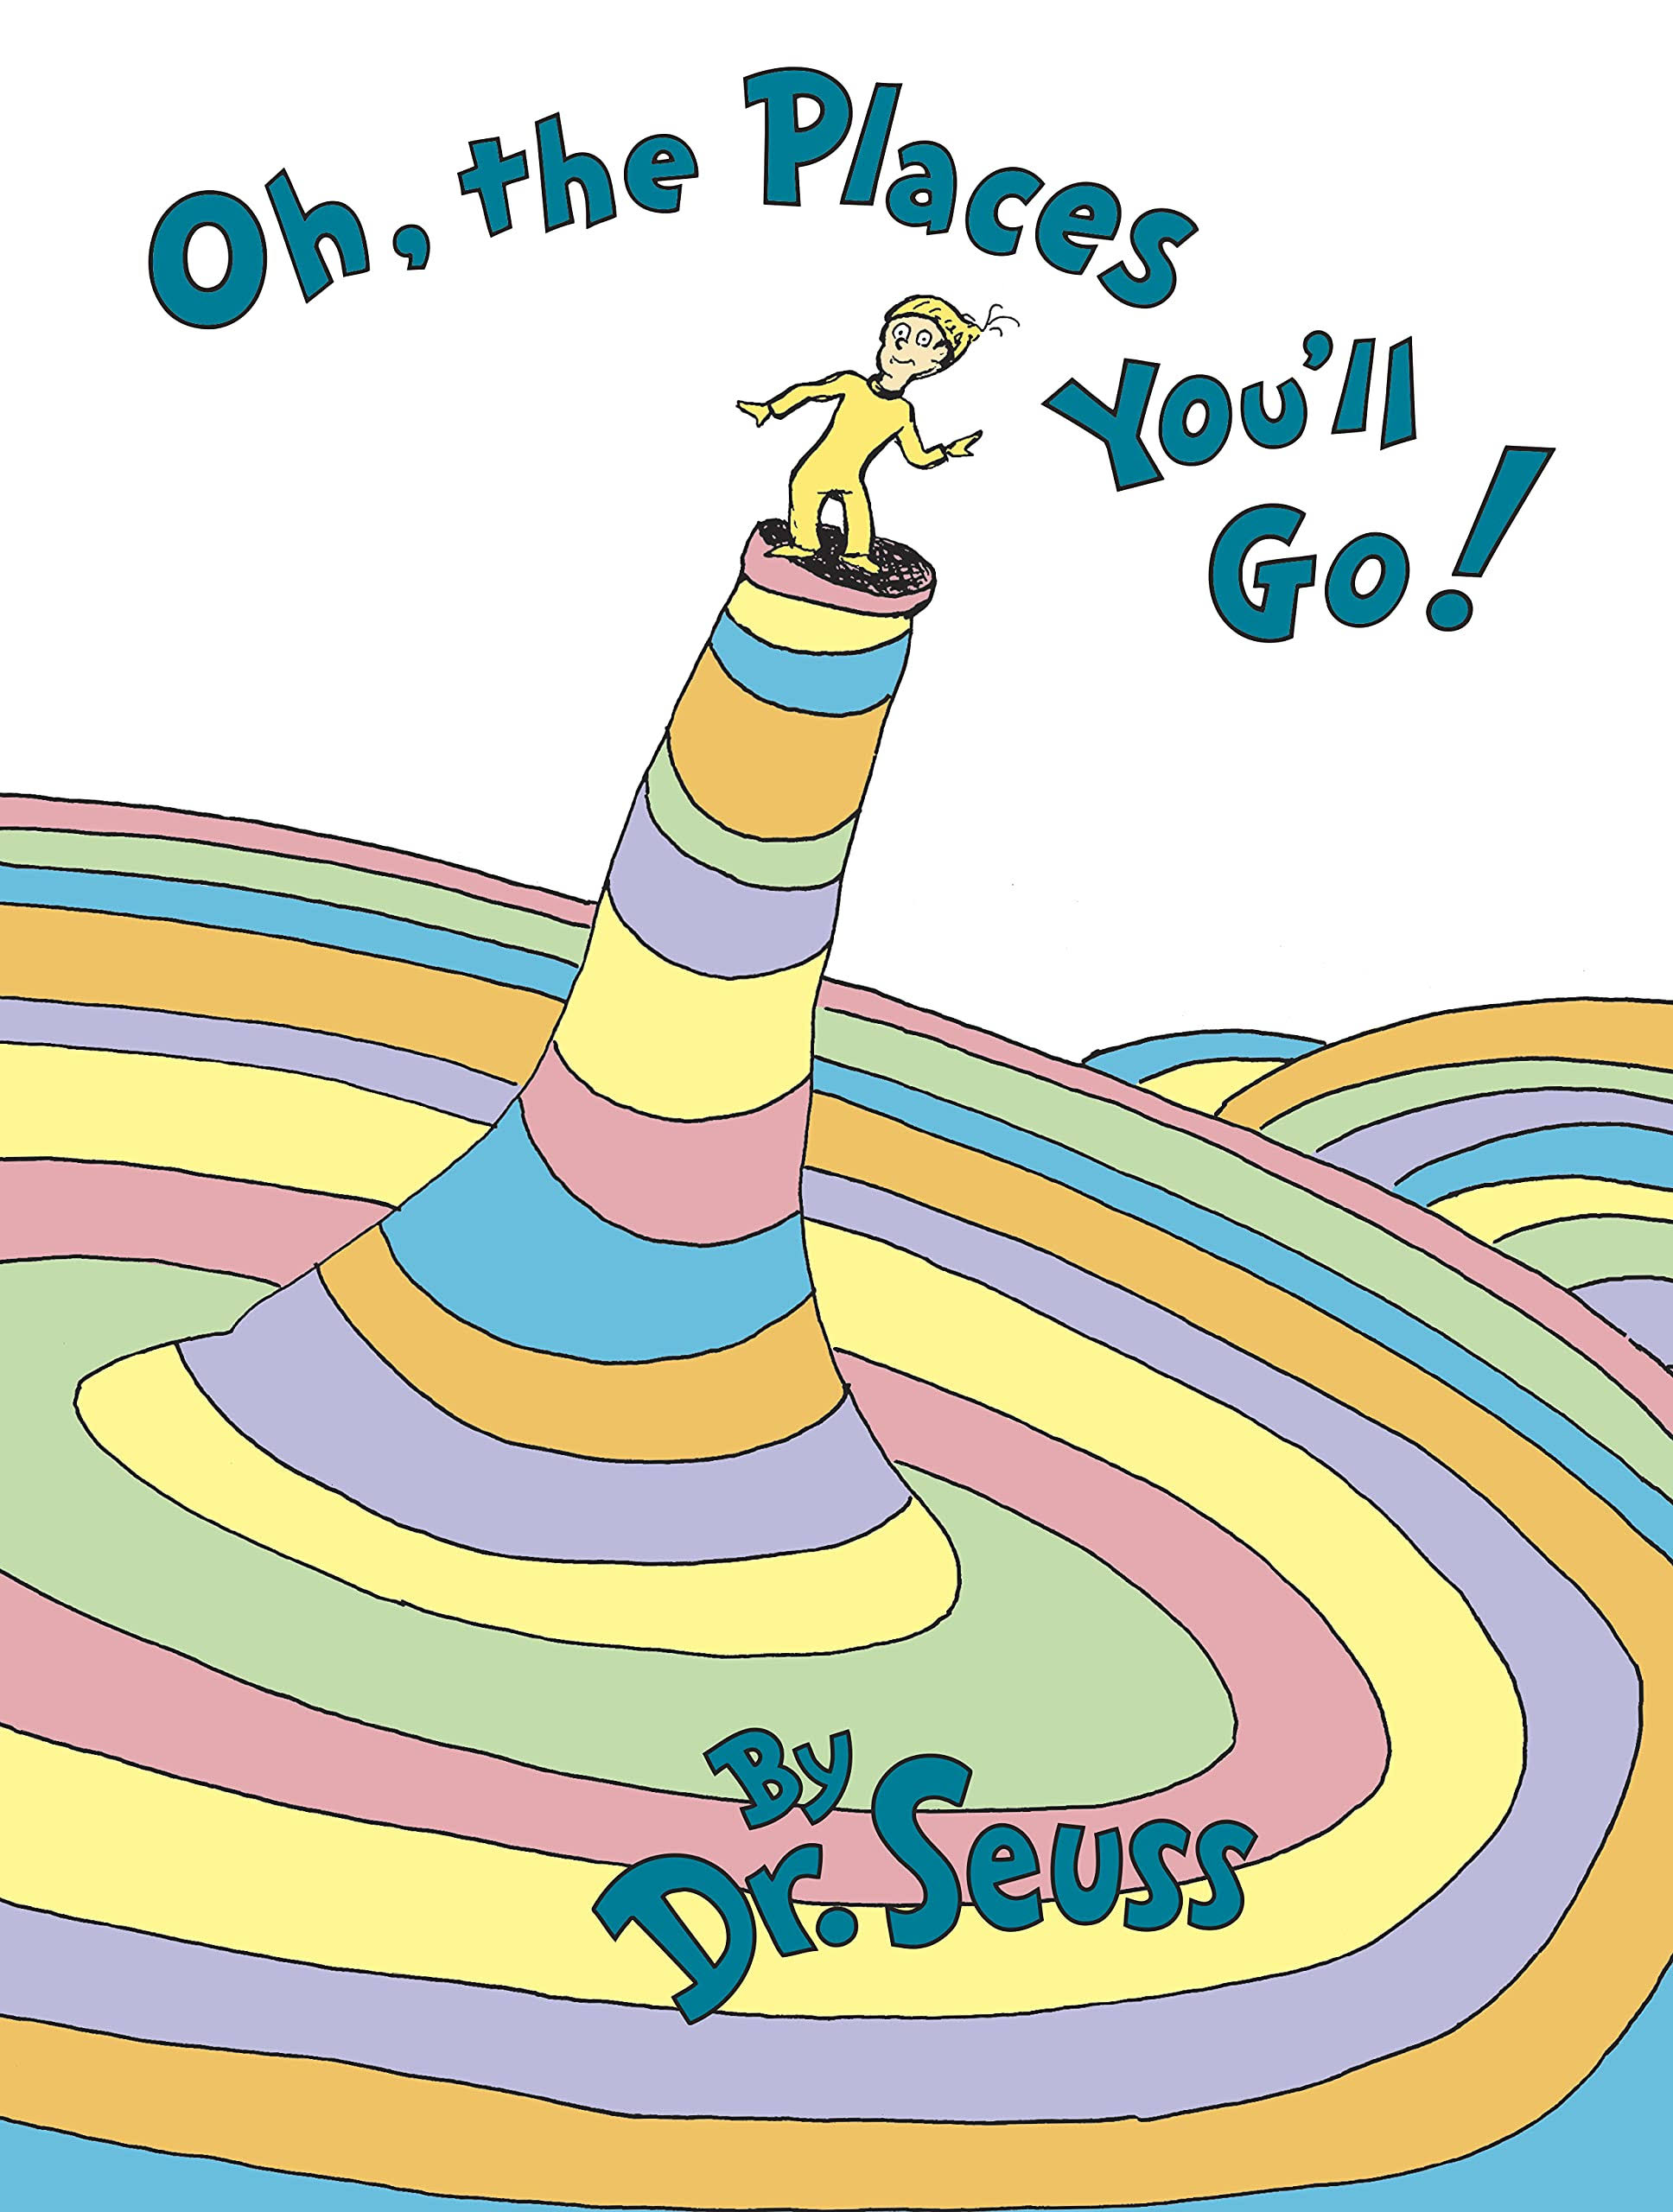 Oh The Places You'll Go! by Dr Seuss